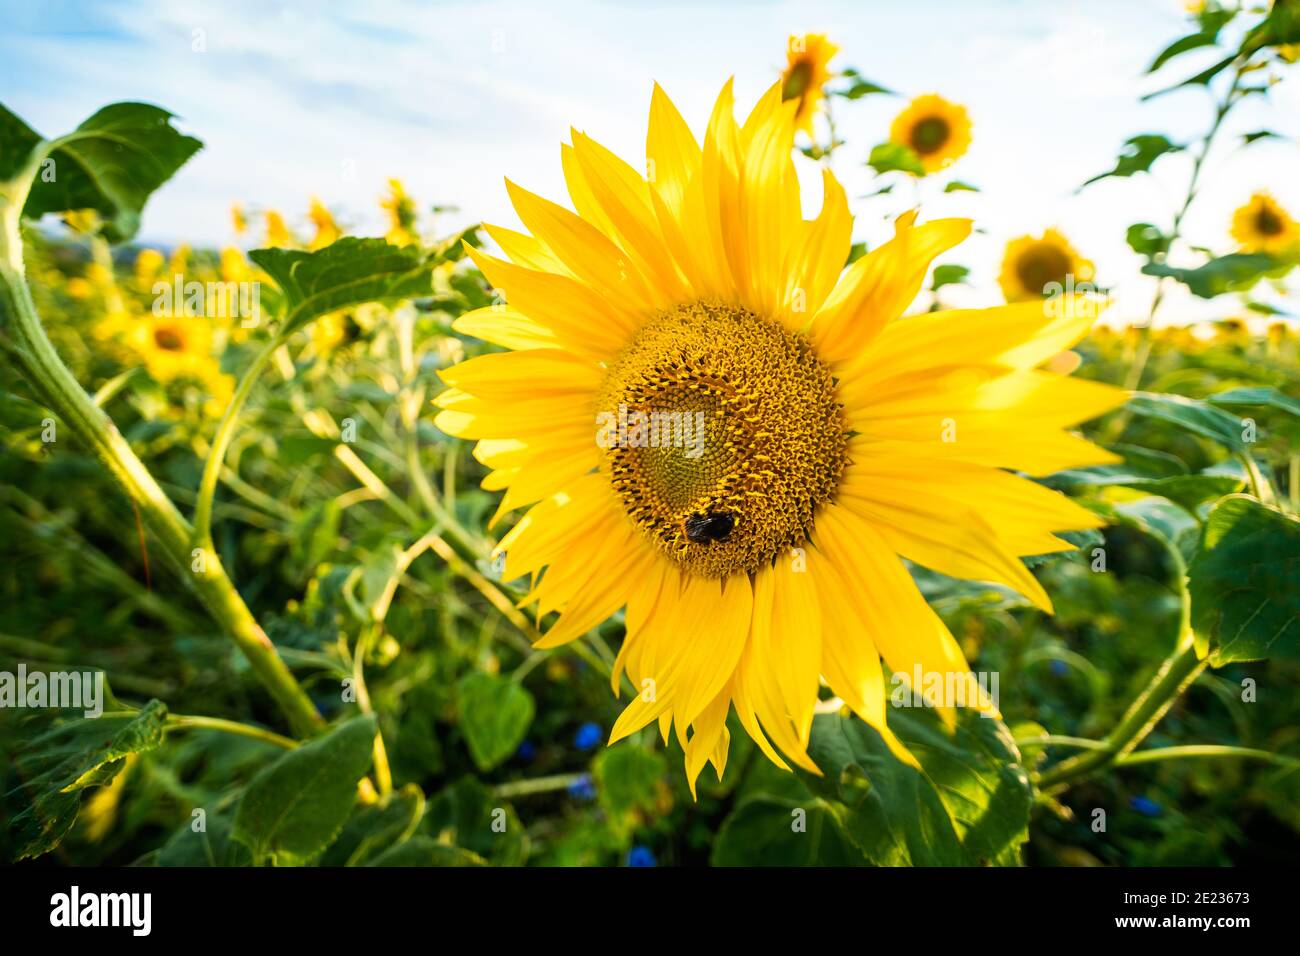 Close-up of common sunflower bloom in artistic nature scene. Helianthus annuus. Blooming flower head with bee in center and beautiful yellow petals. Stock Photo